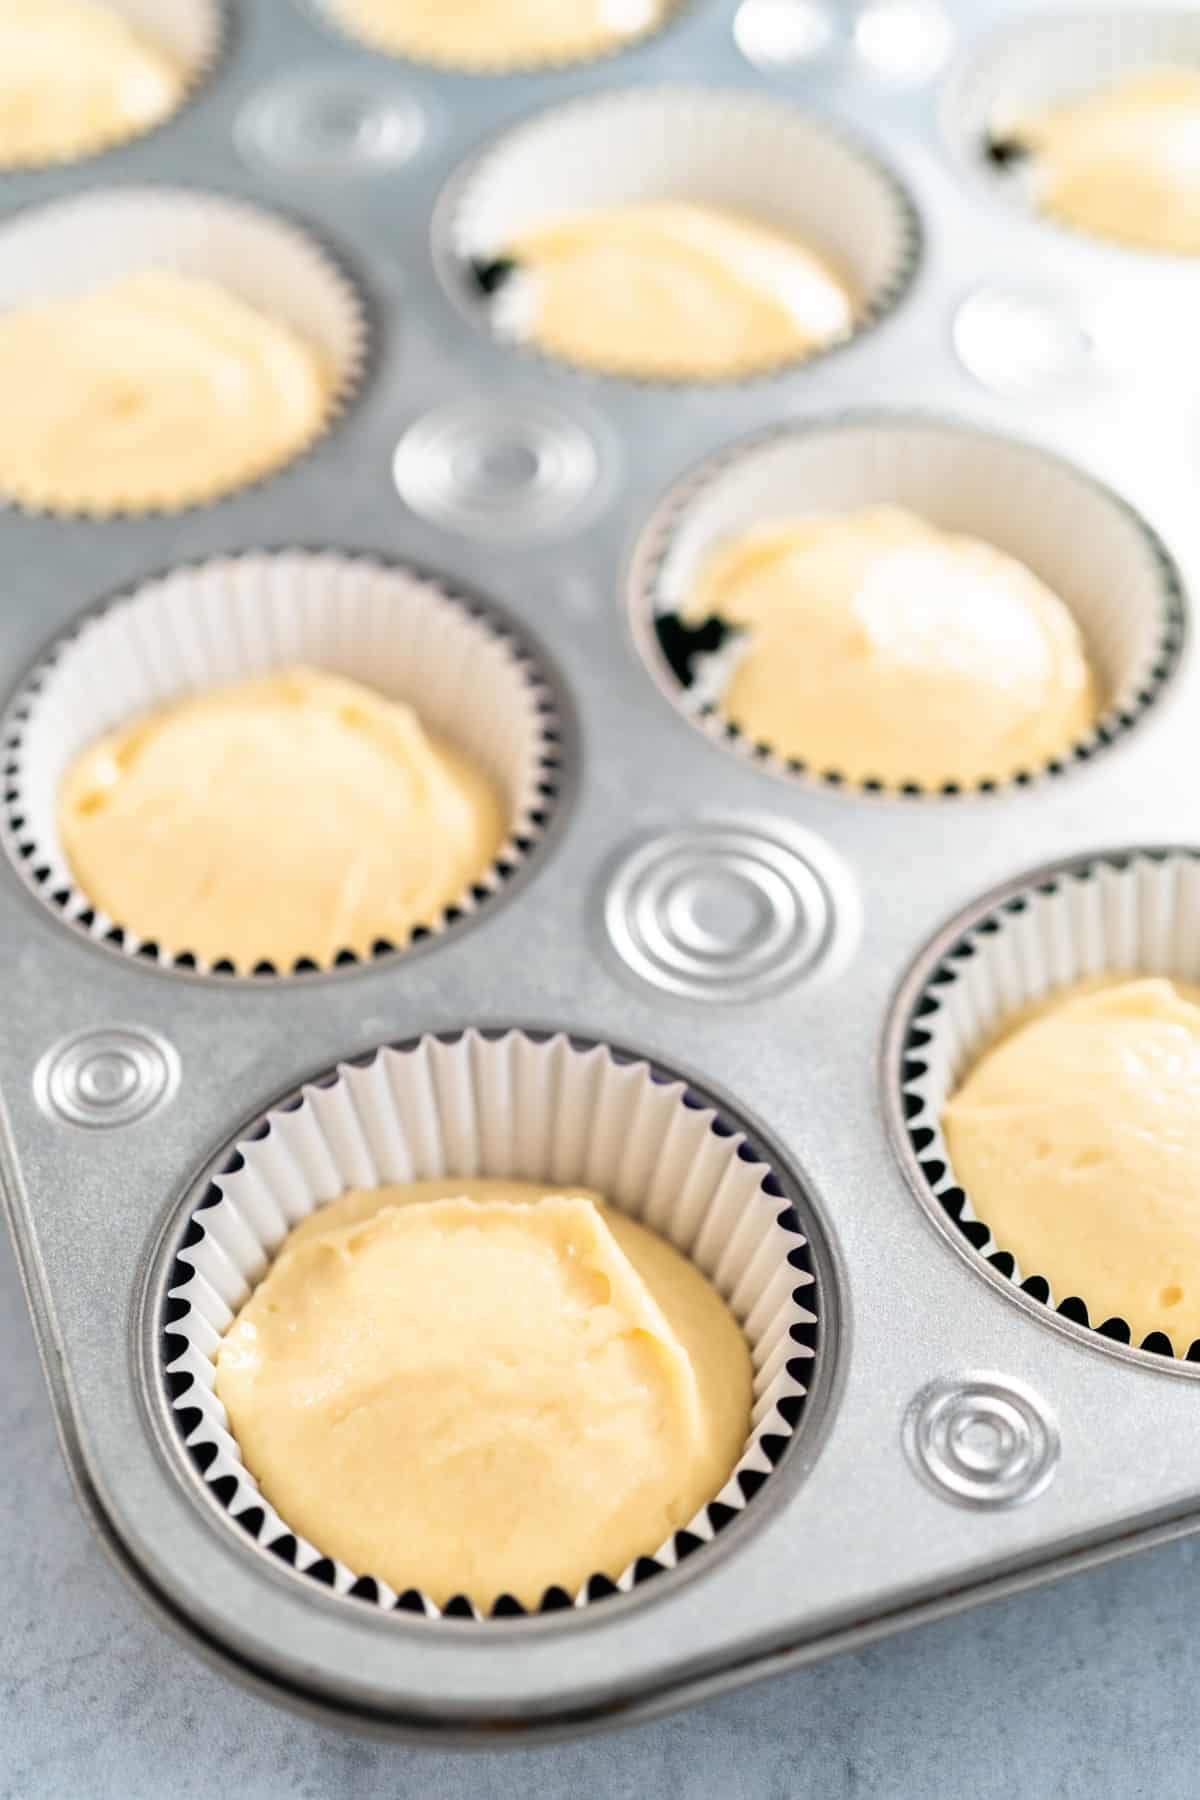 cupcake batter in the cupcake liners in the cupcake tin.